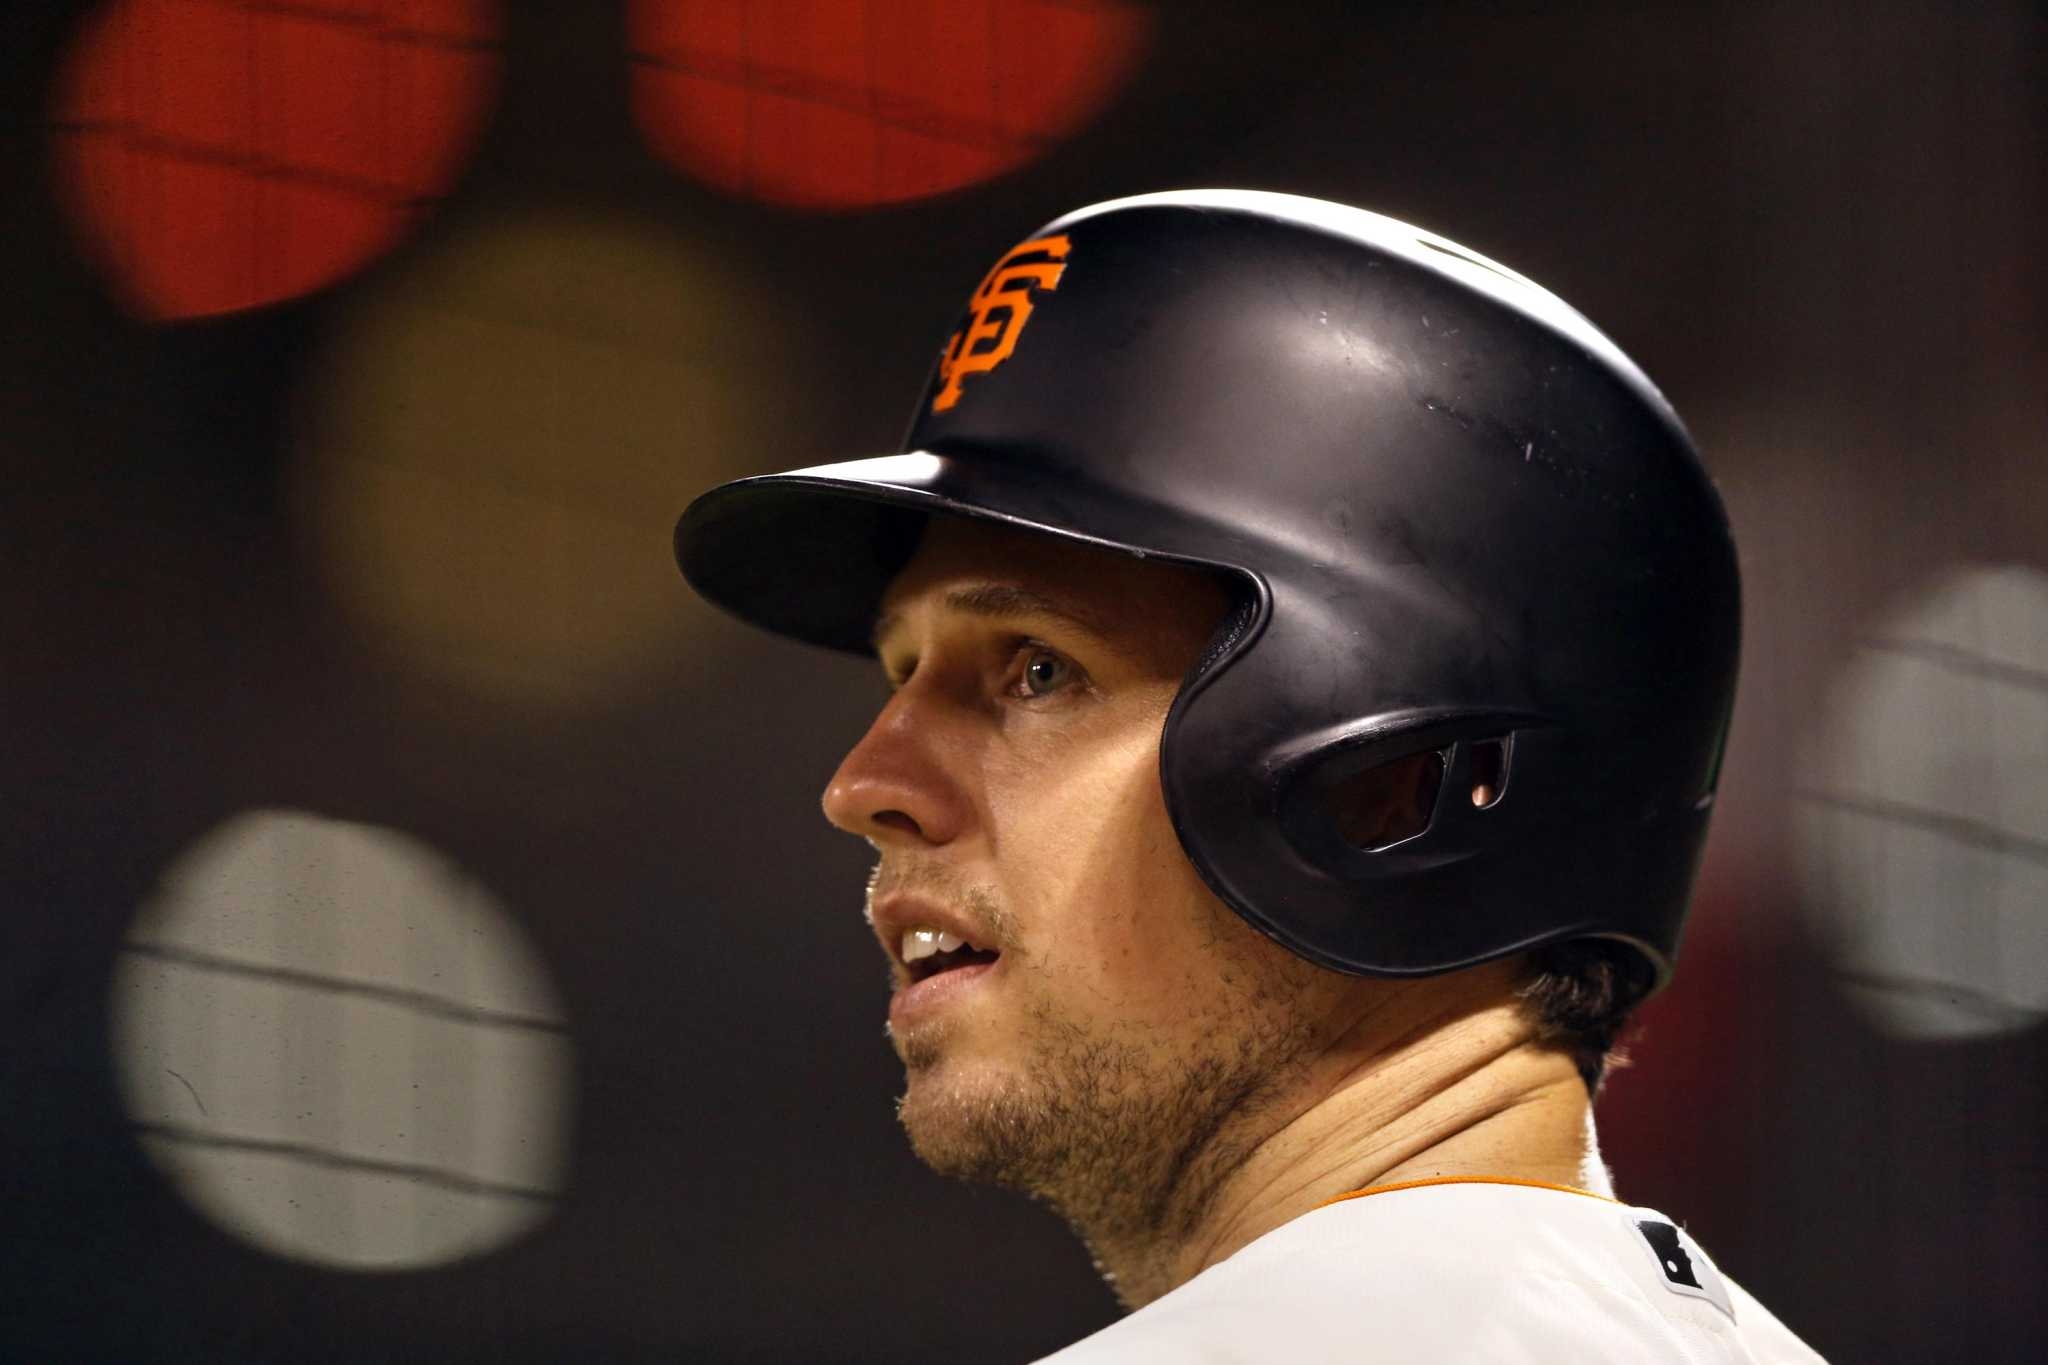 Buster: The Legendary Career of the San Francisco Giants’ Buster Posey